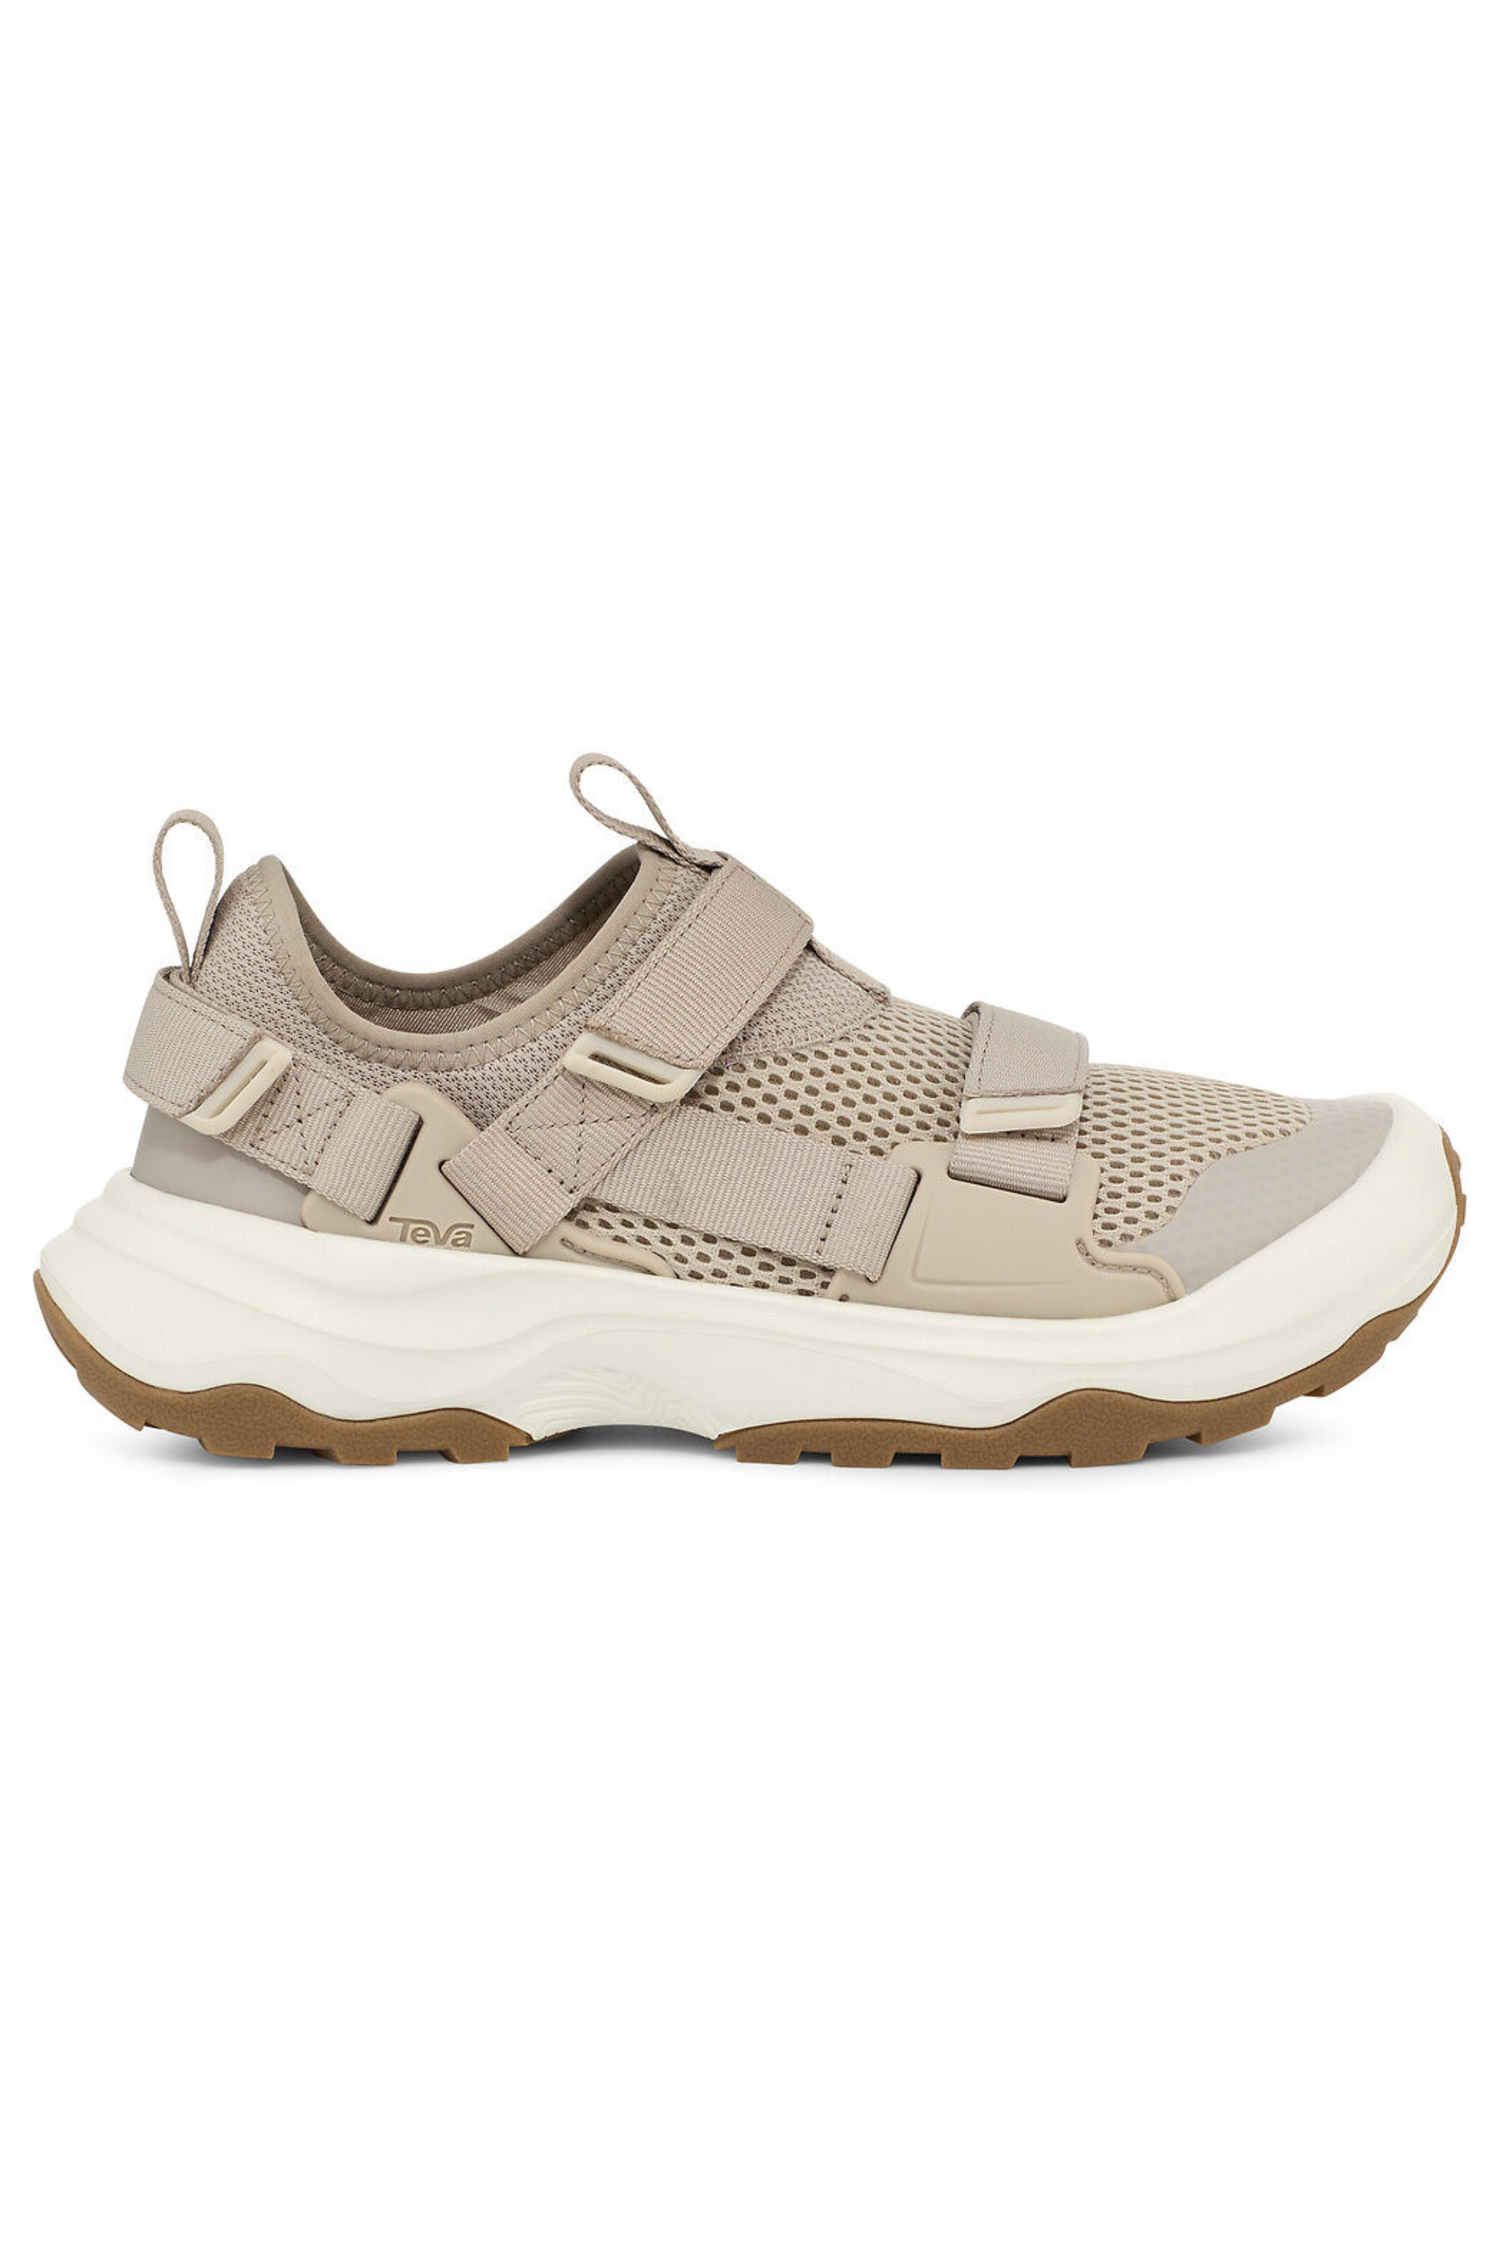 Teva Womens Outflow Universal Birch/Feather Grey